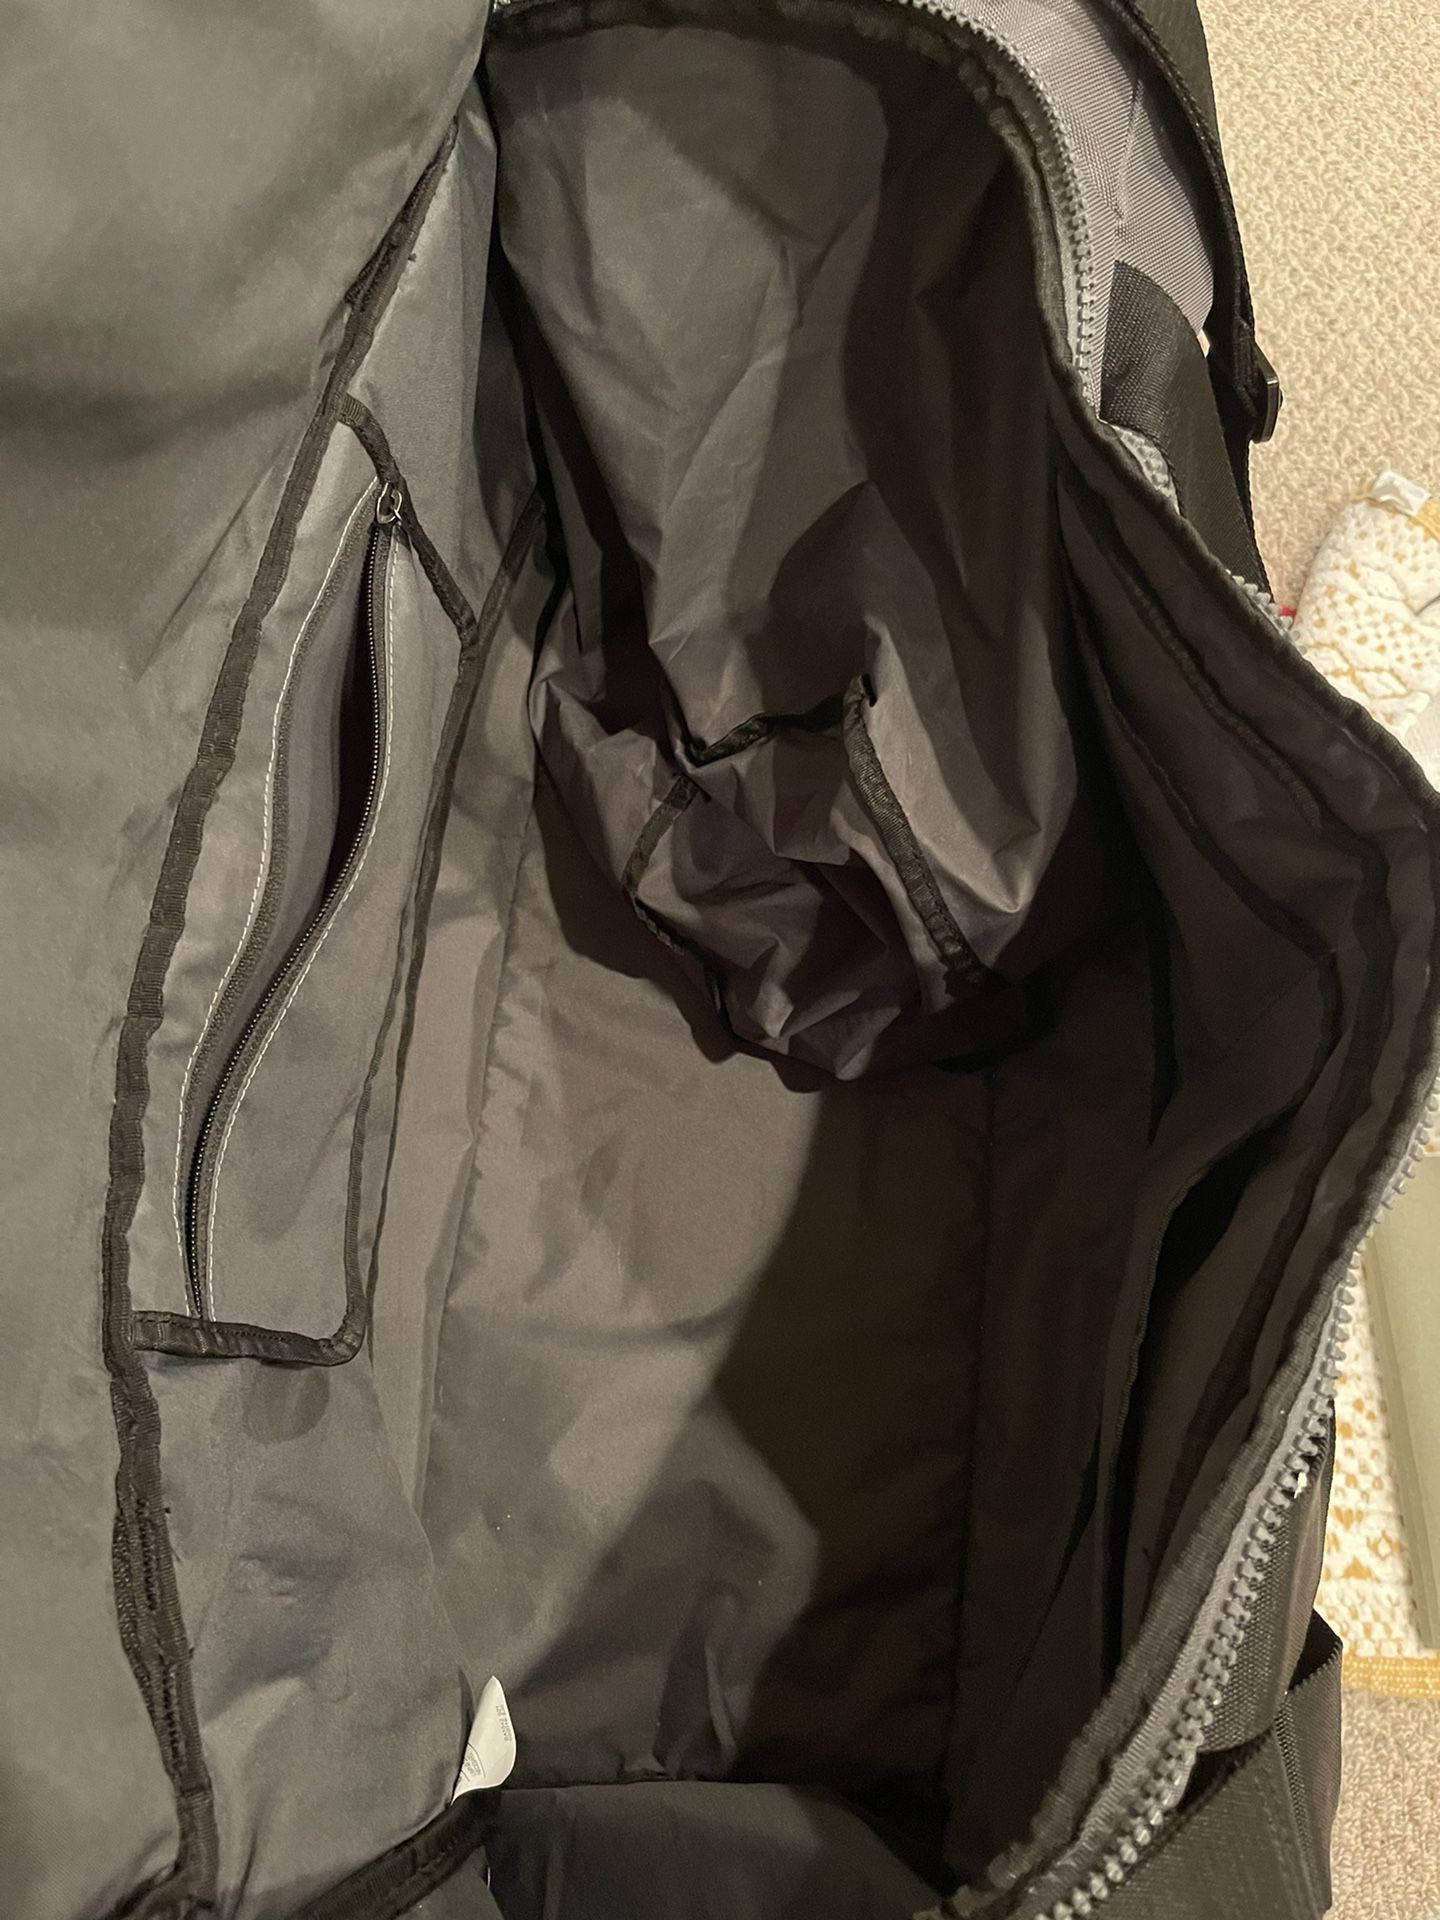 NWT Steve Madden Black duffle gym bag for Sale in Kent, WA - OfferUp